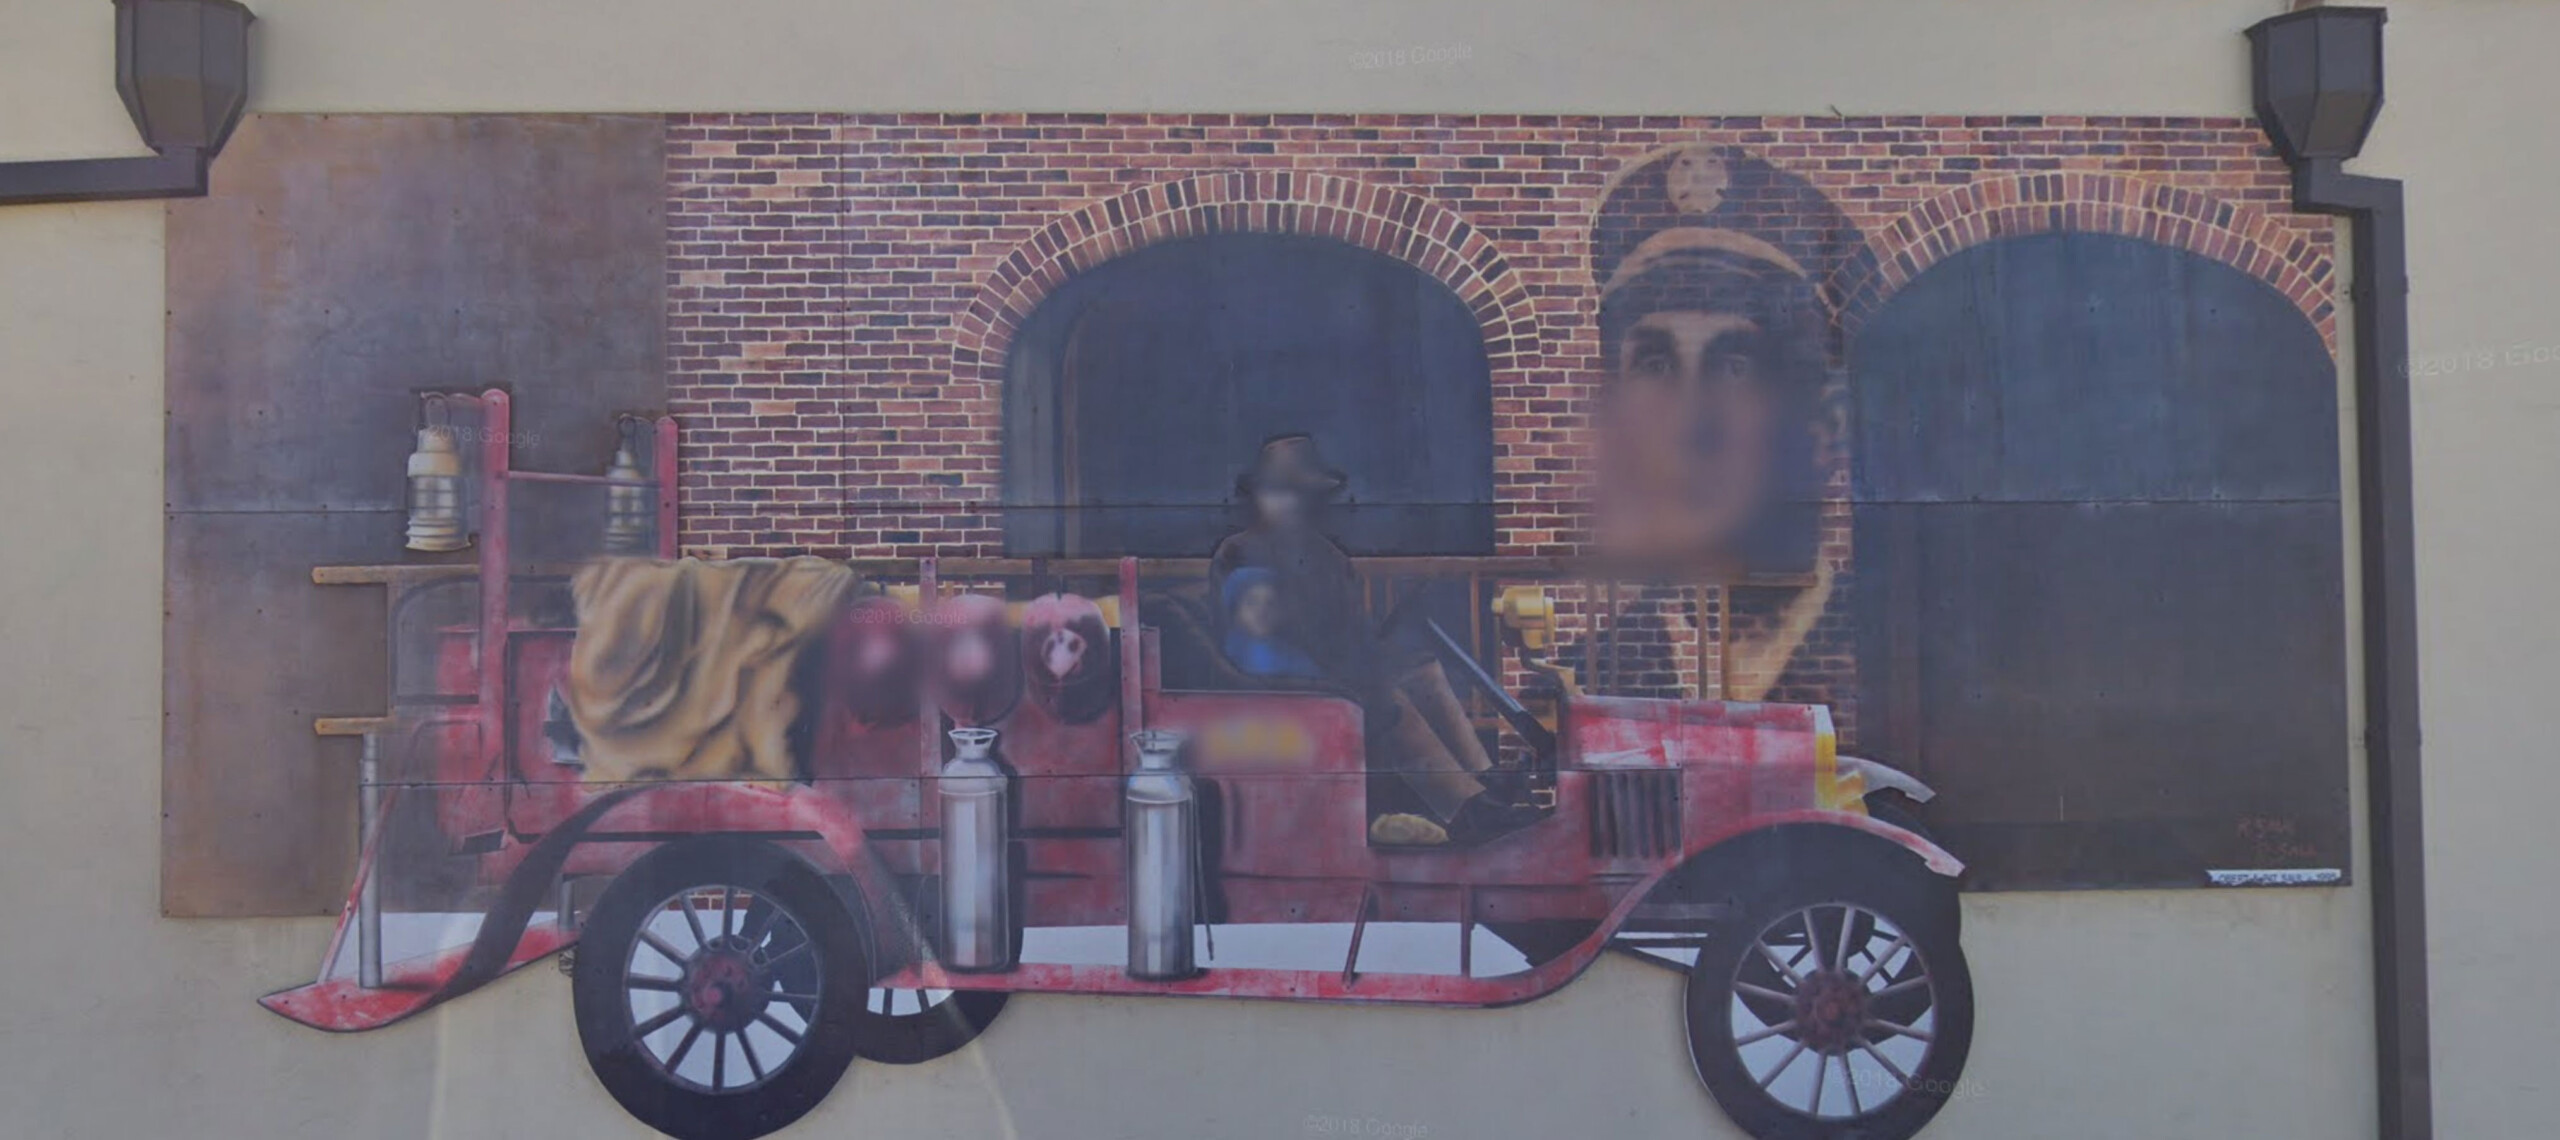 Lompoc Mural - Lompoc's First Fire Chief (1995) - Located at 121 South G Street